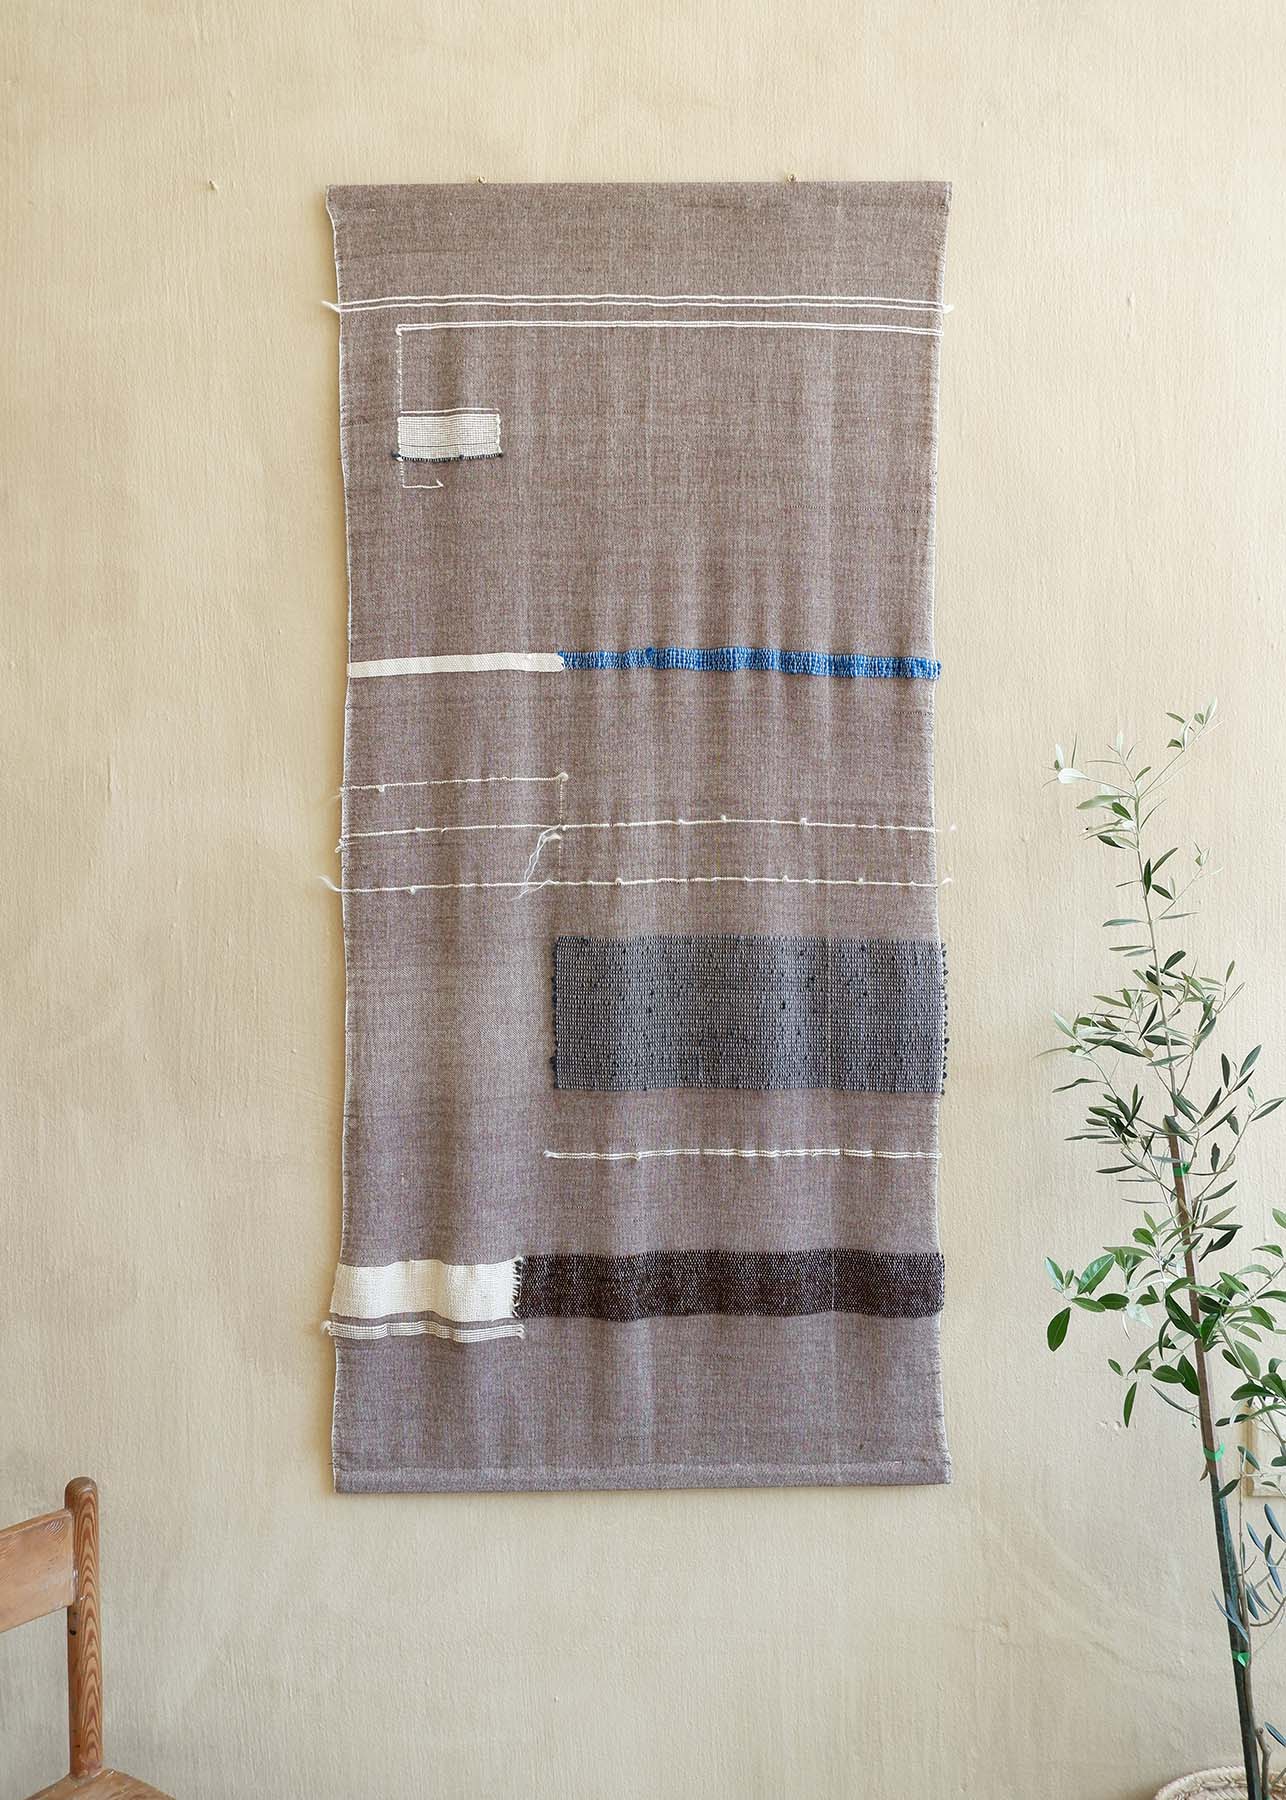 'Script' Original artwork handwoven by Leila Walter using Vintage & locally sourced wool, mohair & cotton